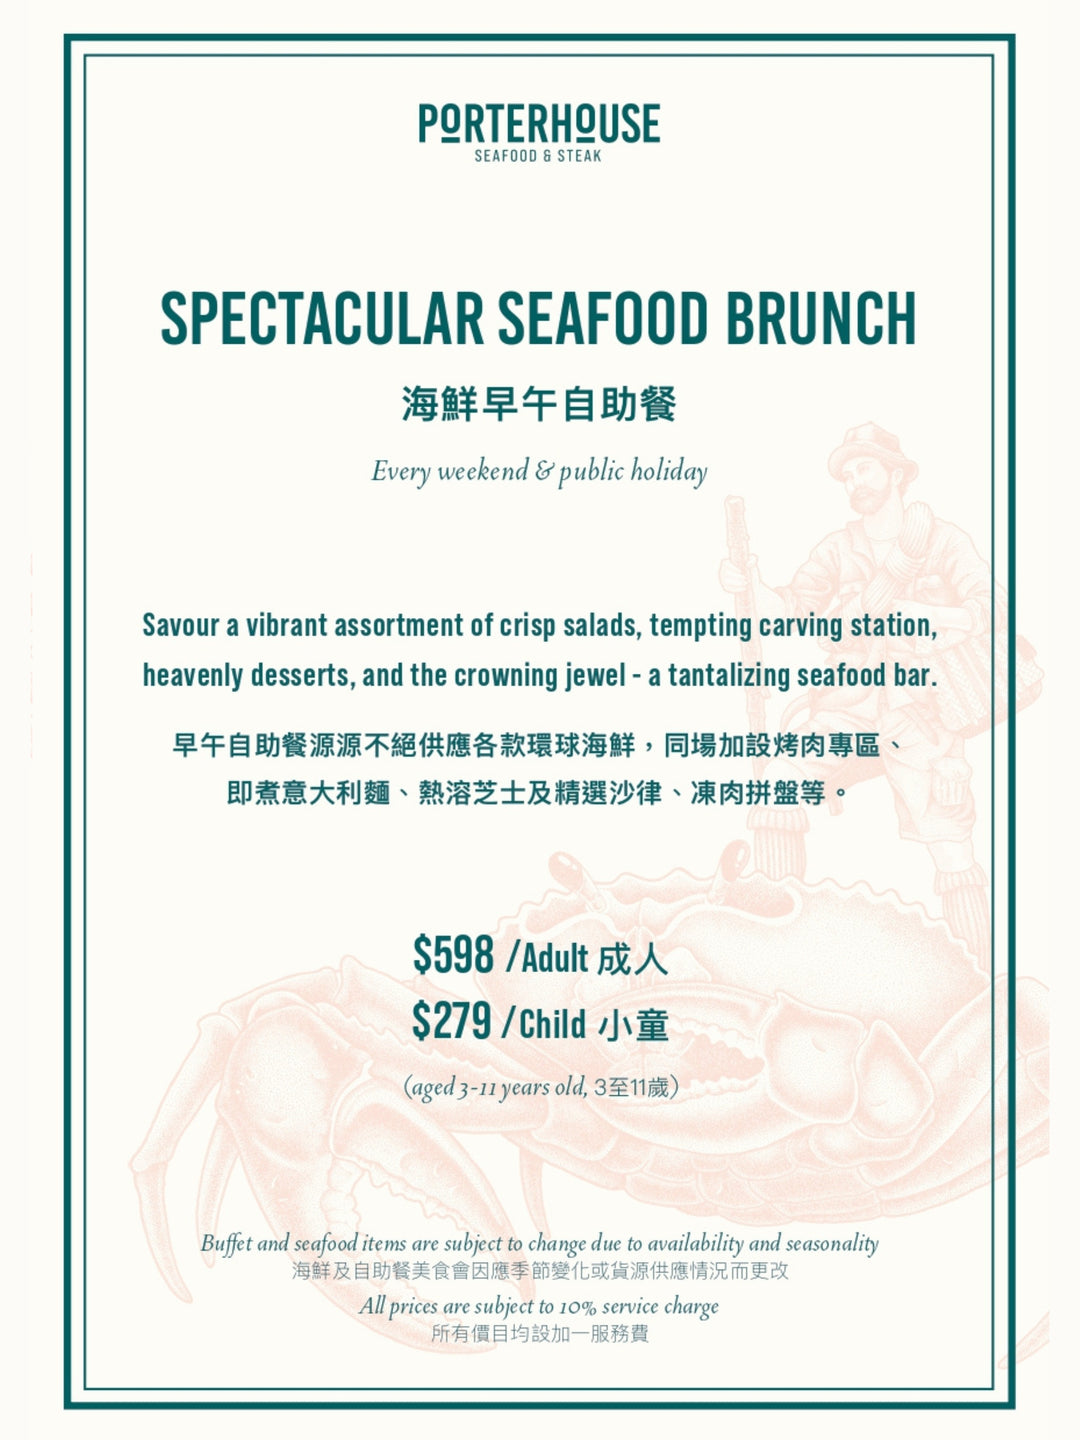 Porterhouse Mother's Day Seafood Weekend Brunch